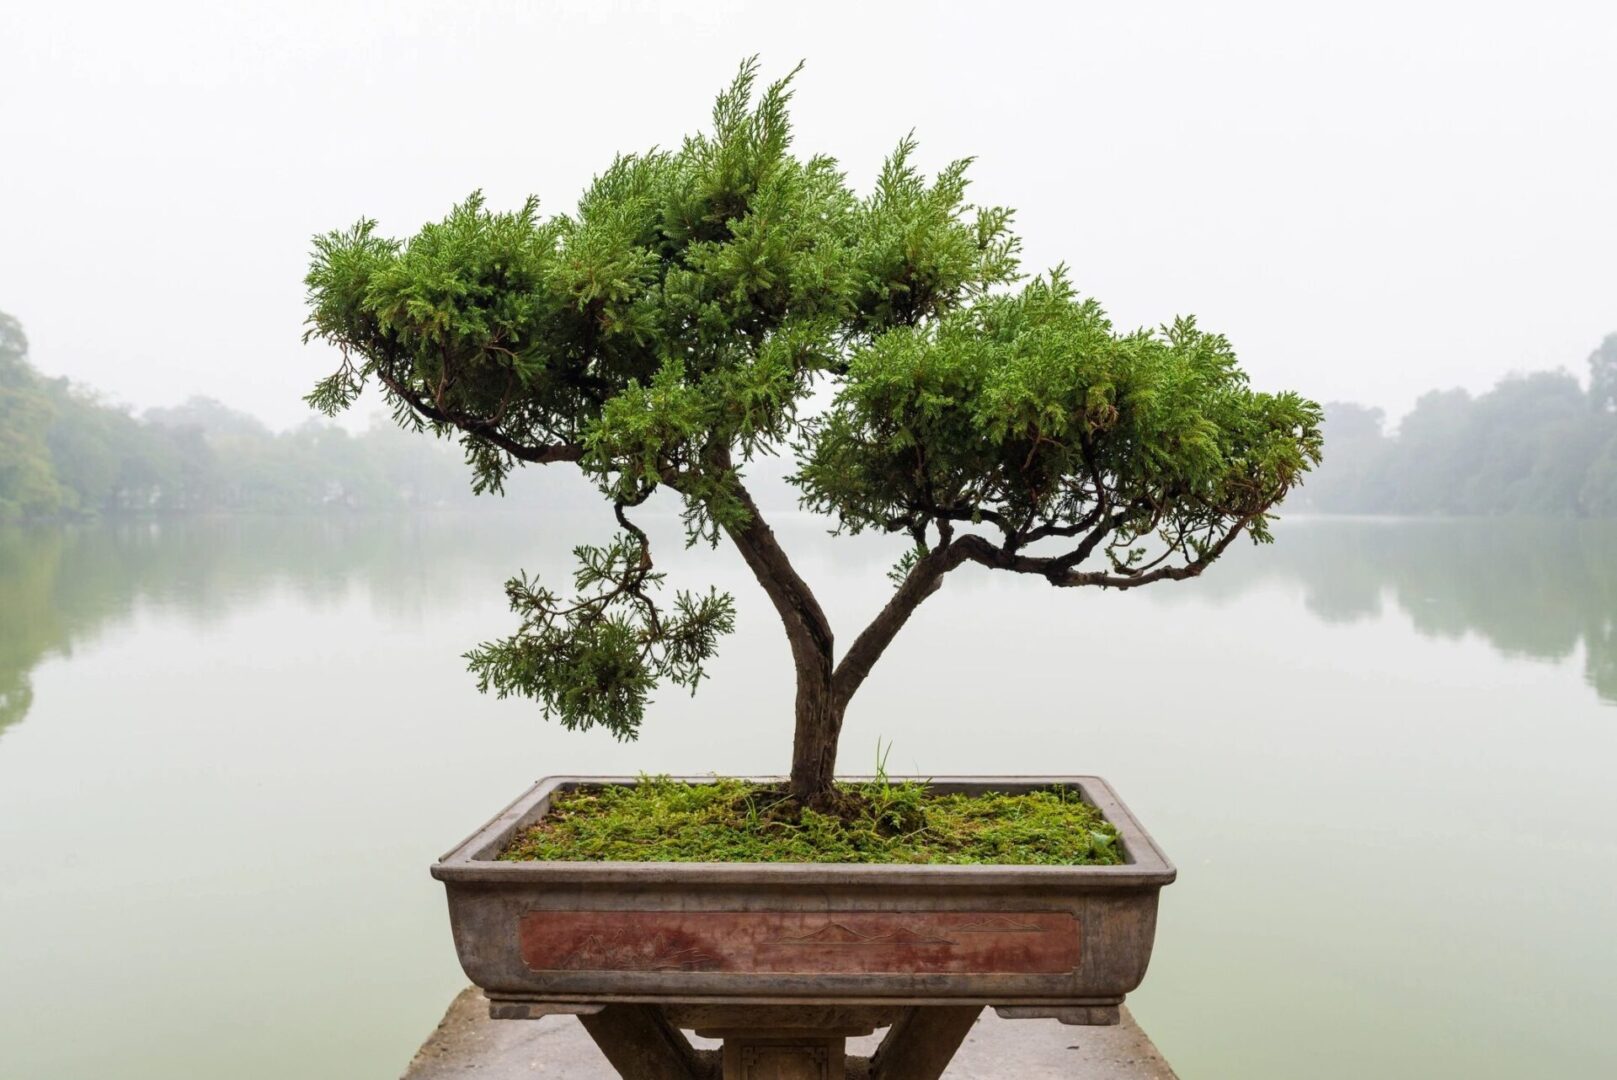 A bonsai tree in a planter on top of a table.